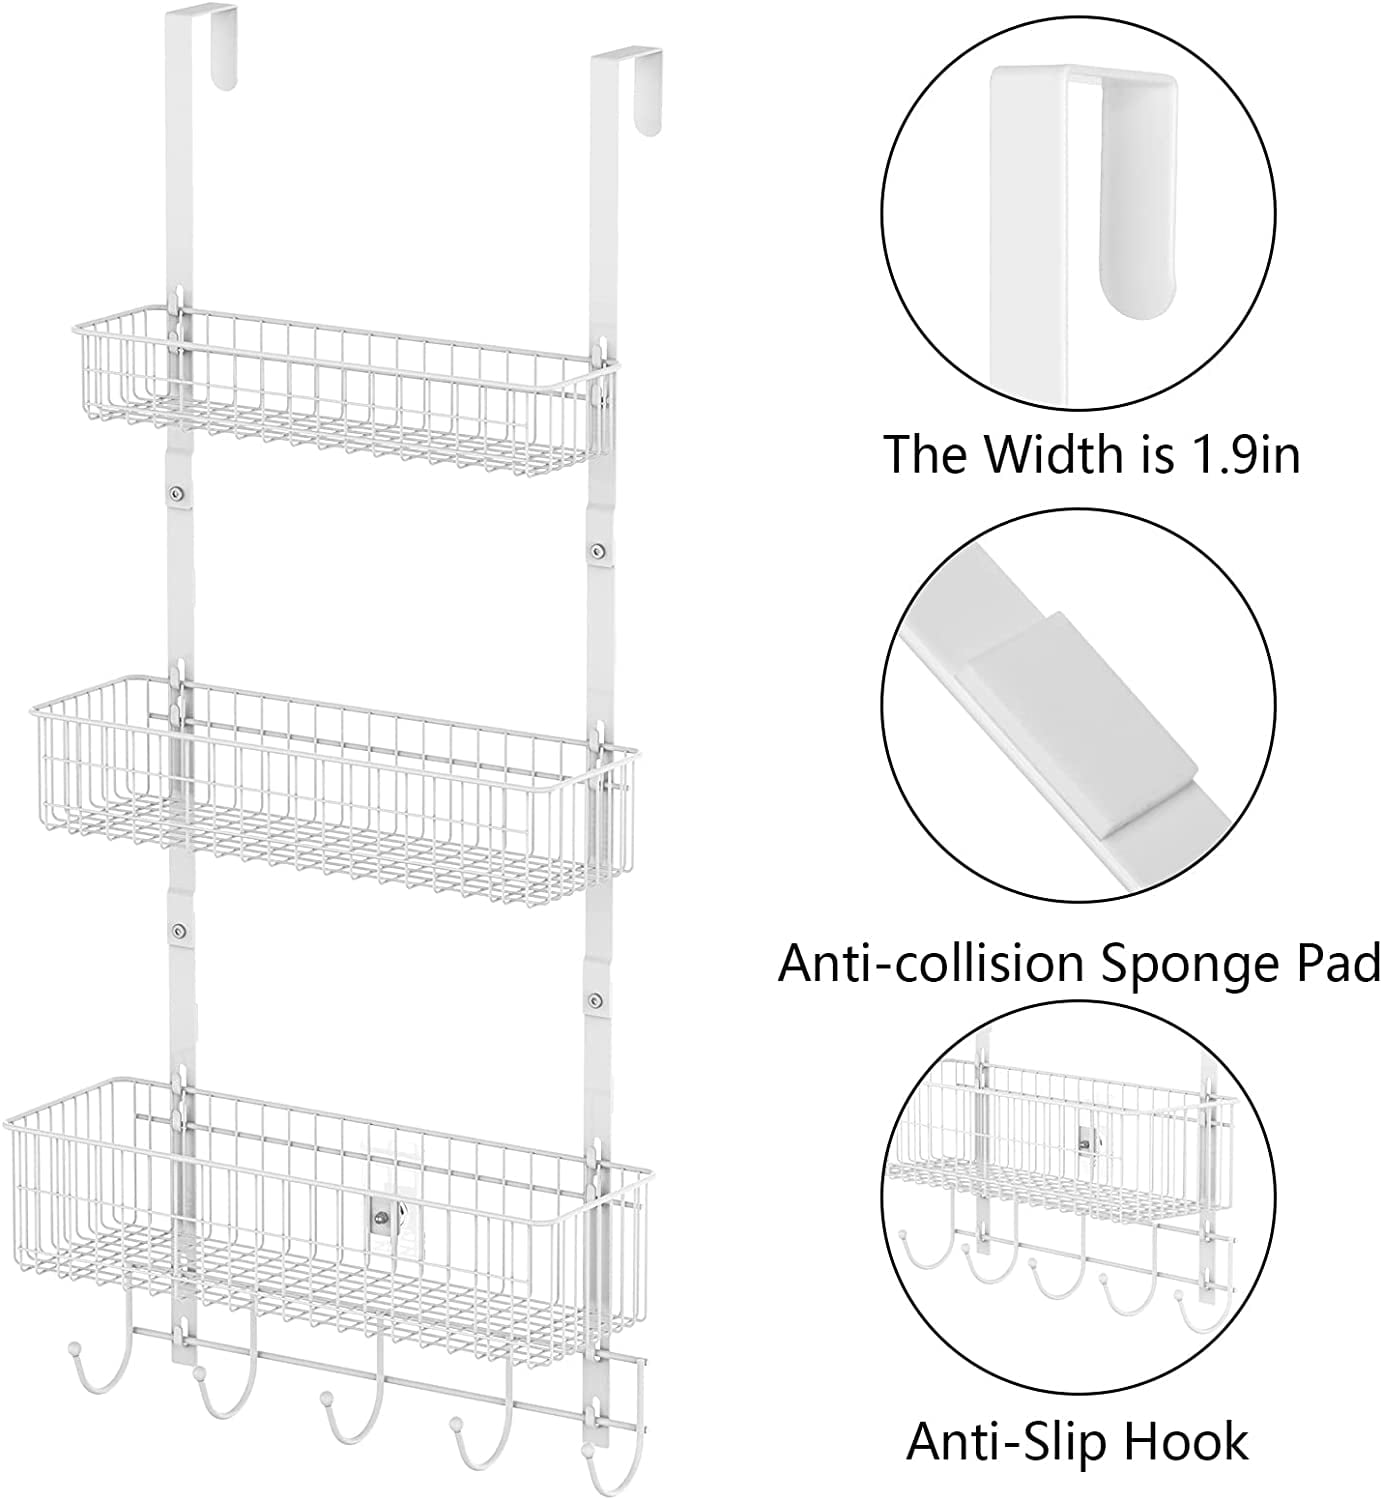 3 Pack Over Cabinet Door Organizer - Stackable Metal Storage Baskets with 3  Short/Mid/Long Wall Hooks+Name Plate+5 S Hooks for Kitchen Bathroom